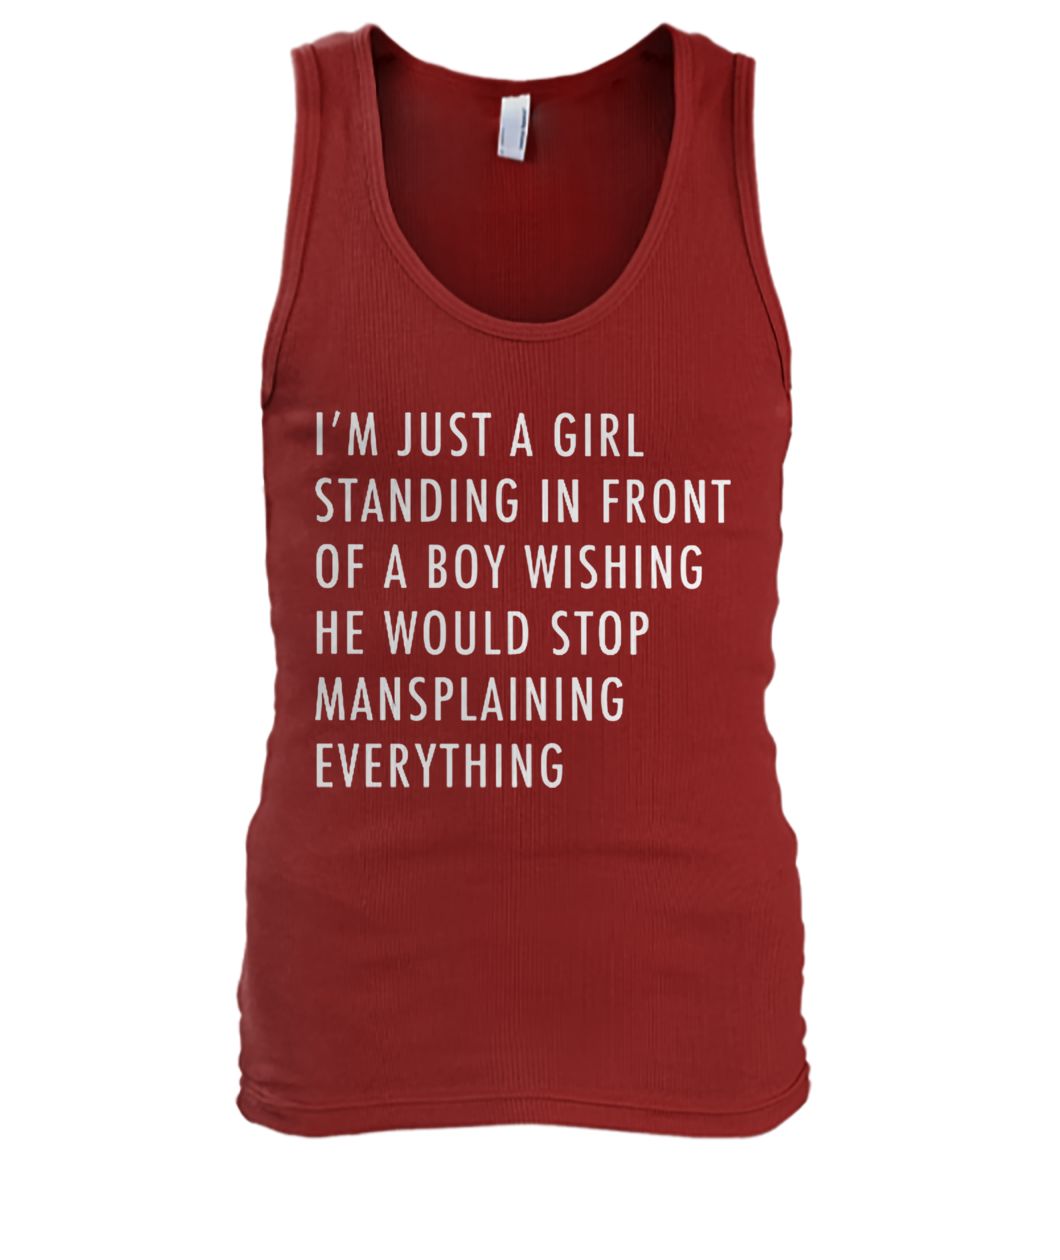 Just a girl standing front a boy wishing men's tank top